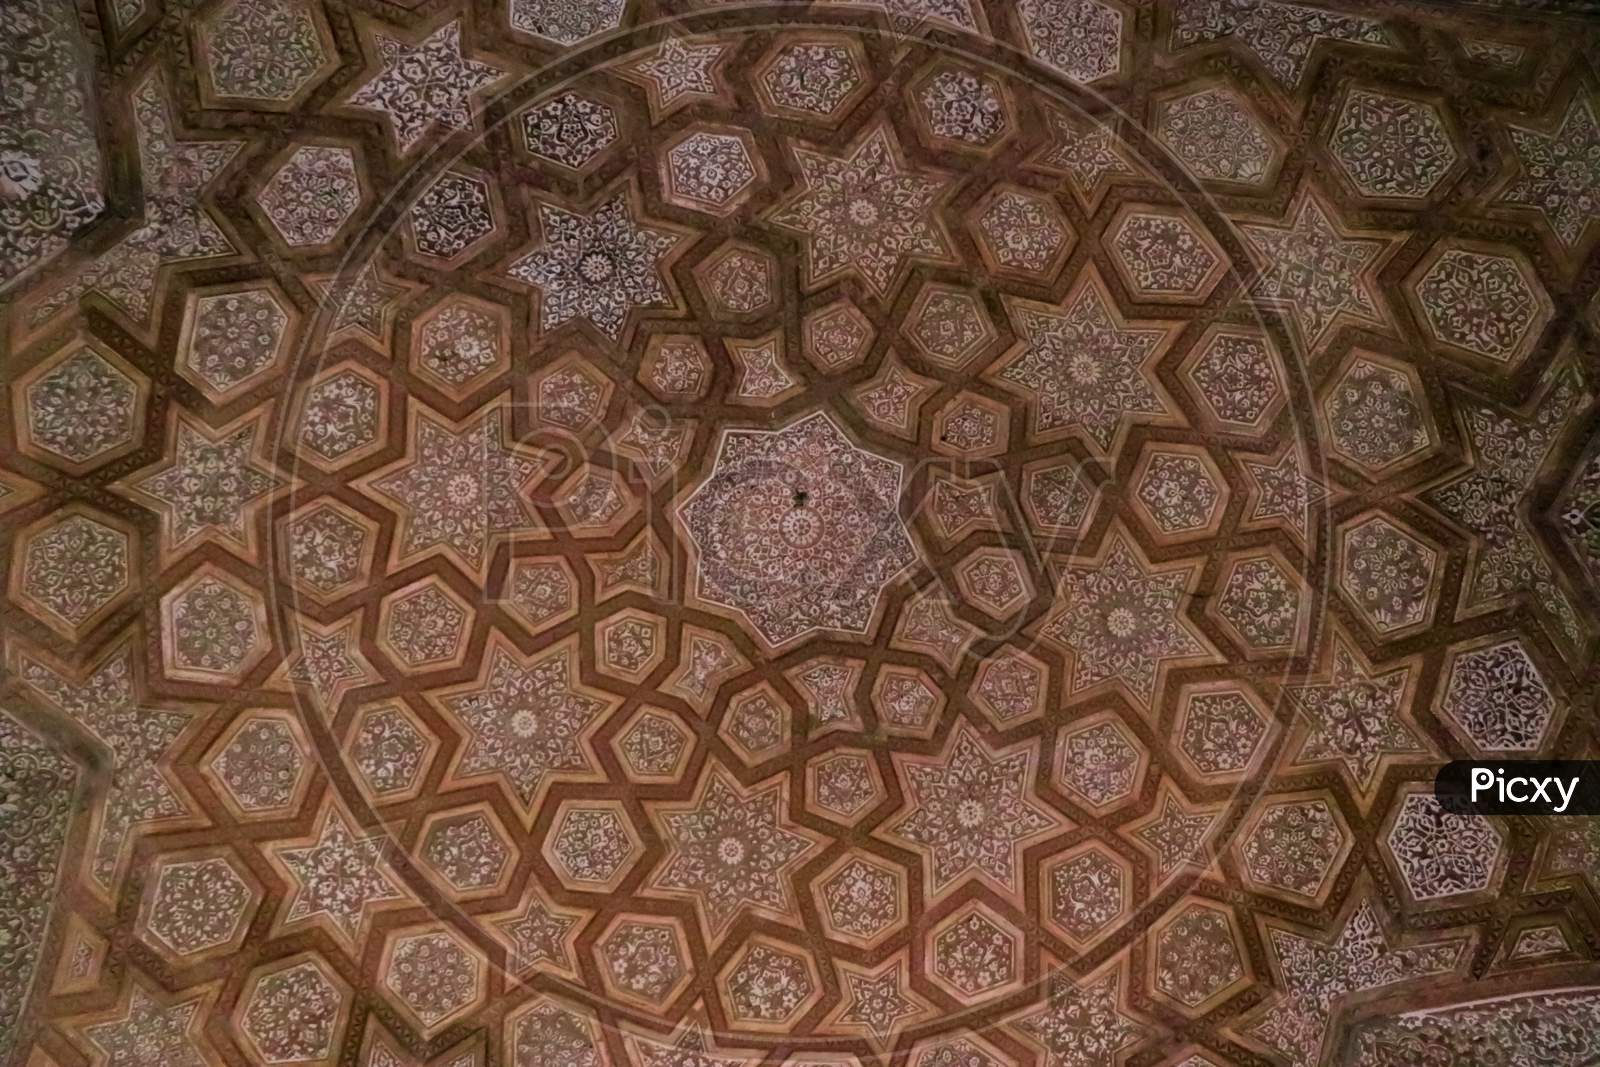 Ceiling decoration on ancient structures.